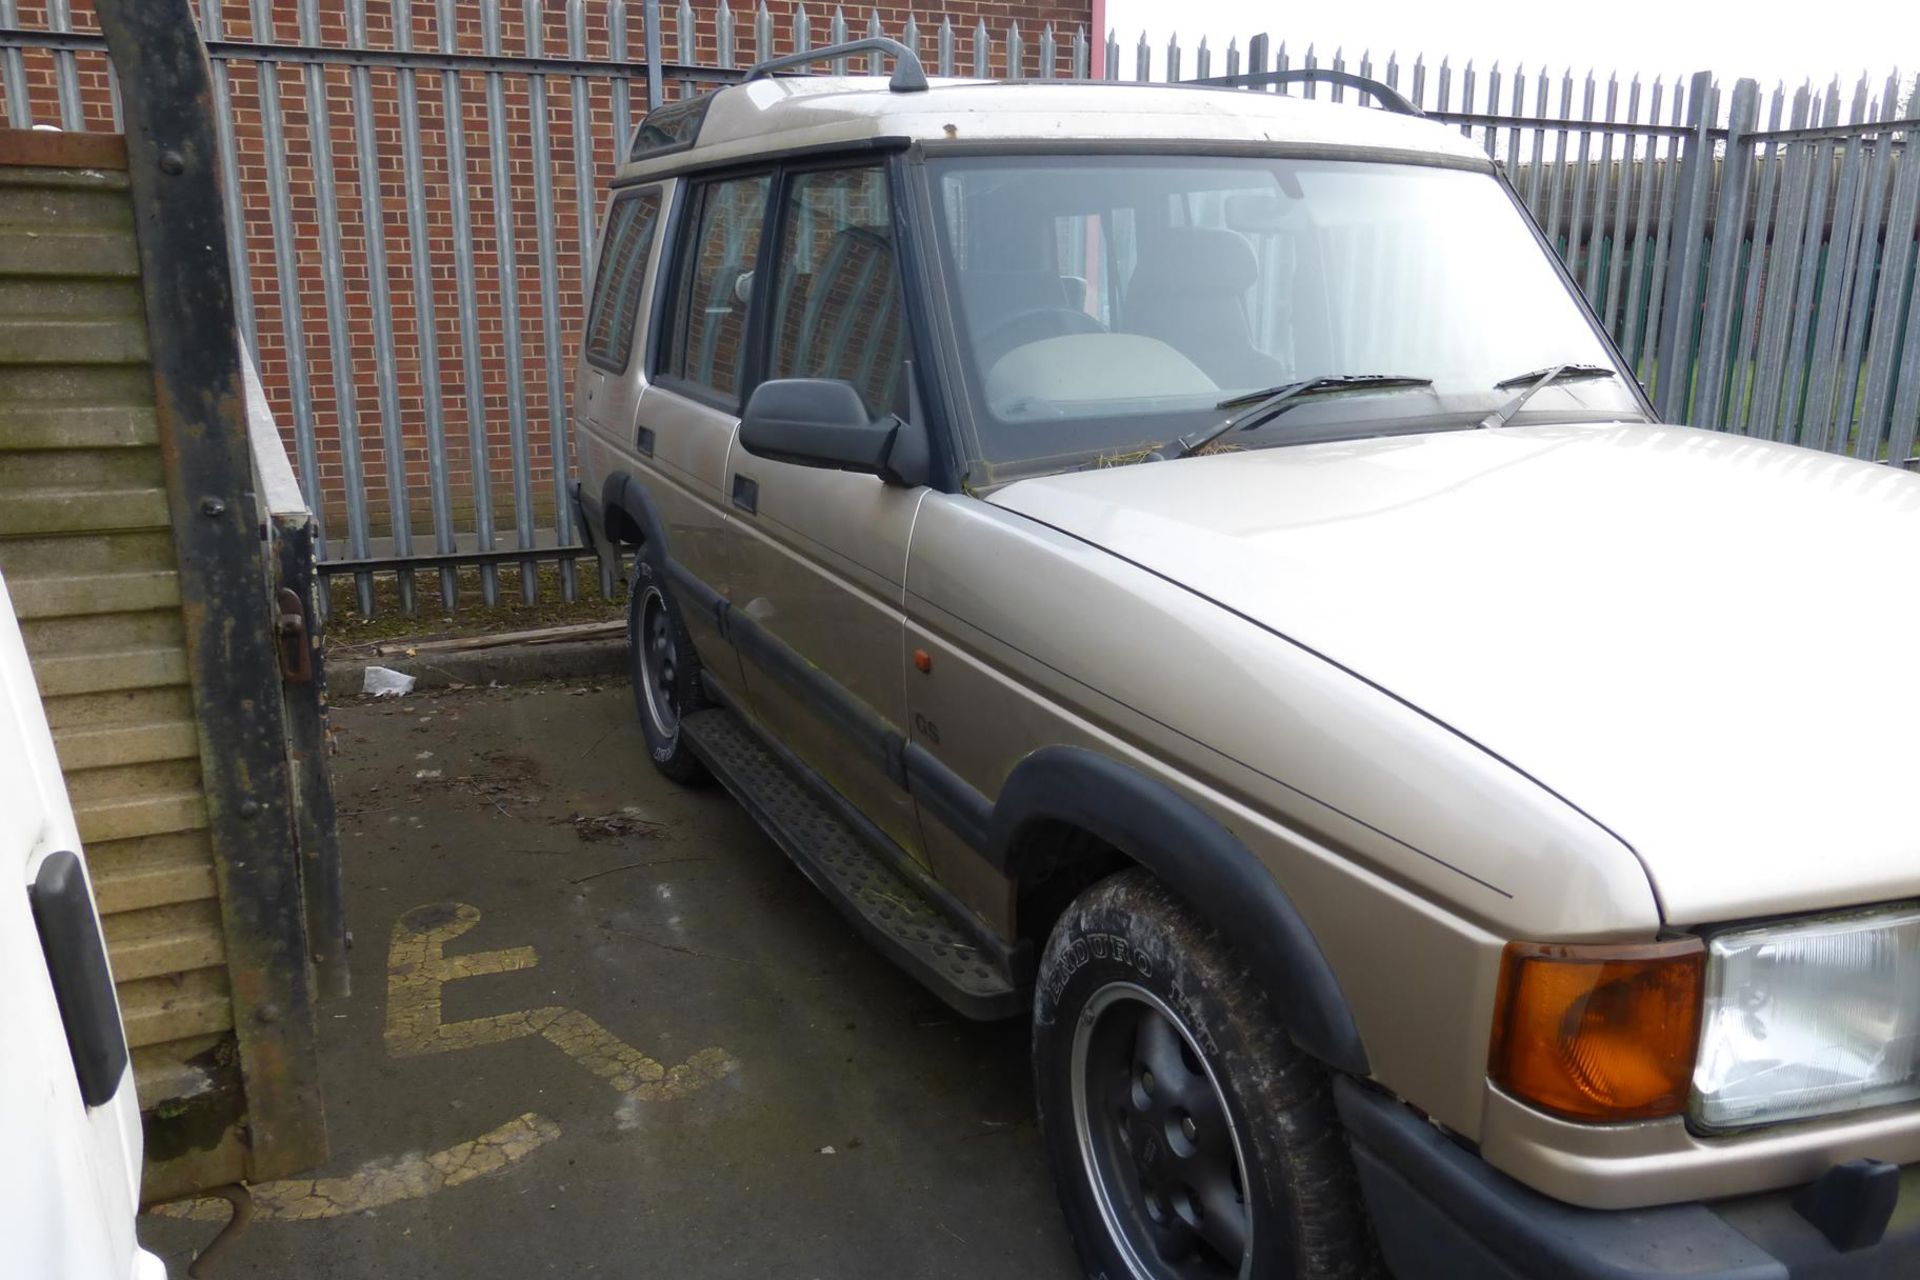 A Land Rover Discovery in Gold 2495cc Diesel Automatic, Date of First Registration March 1998, - Image 7 of 13